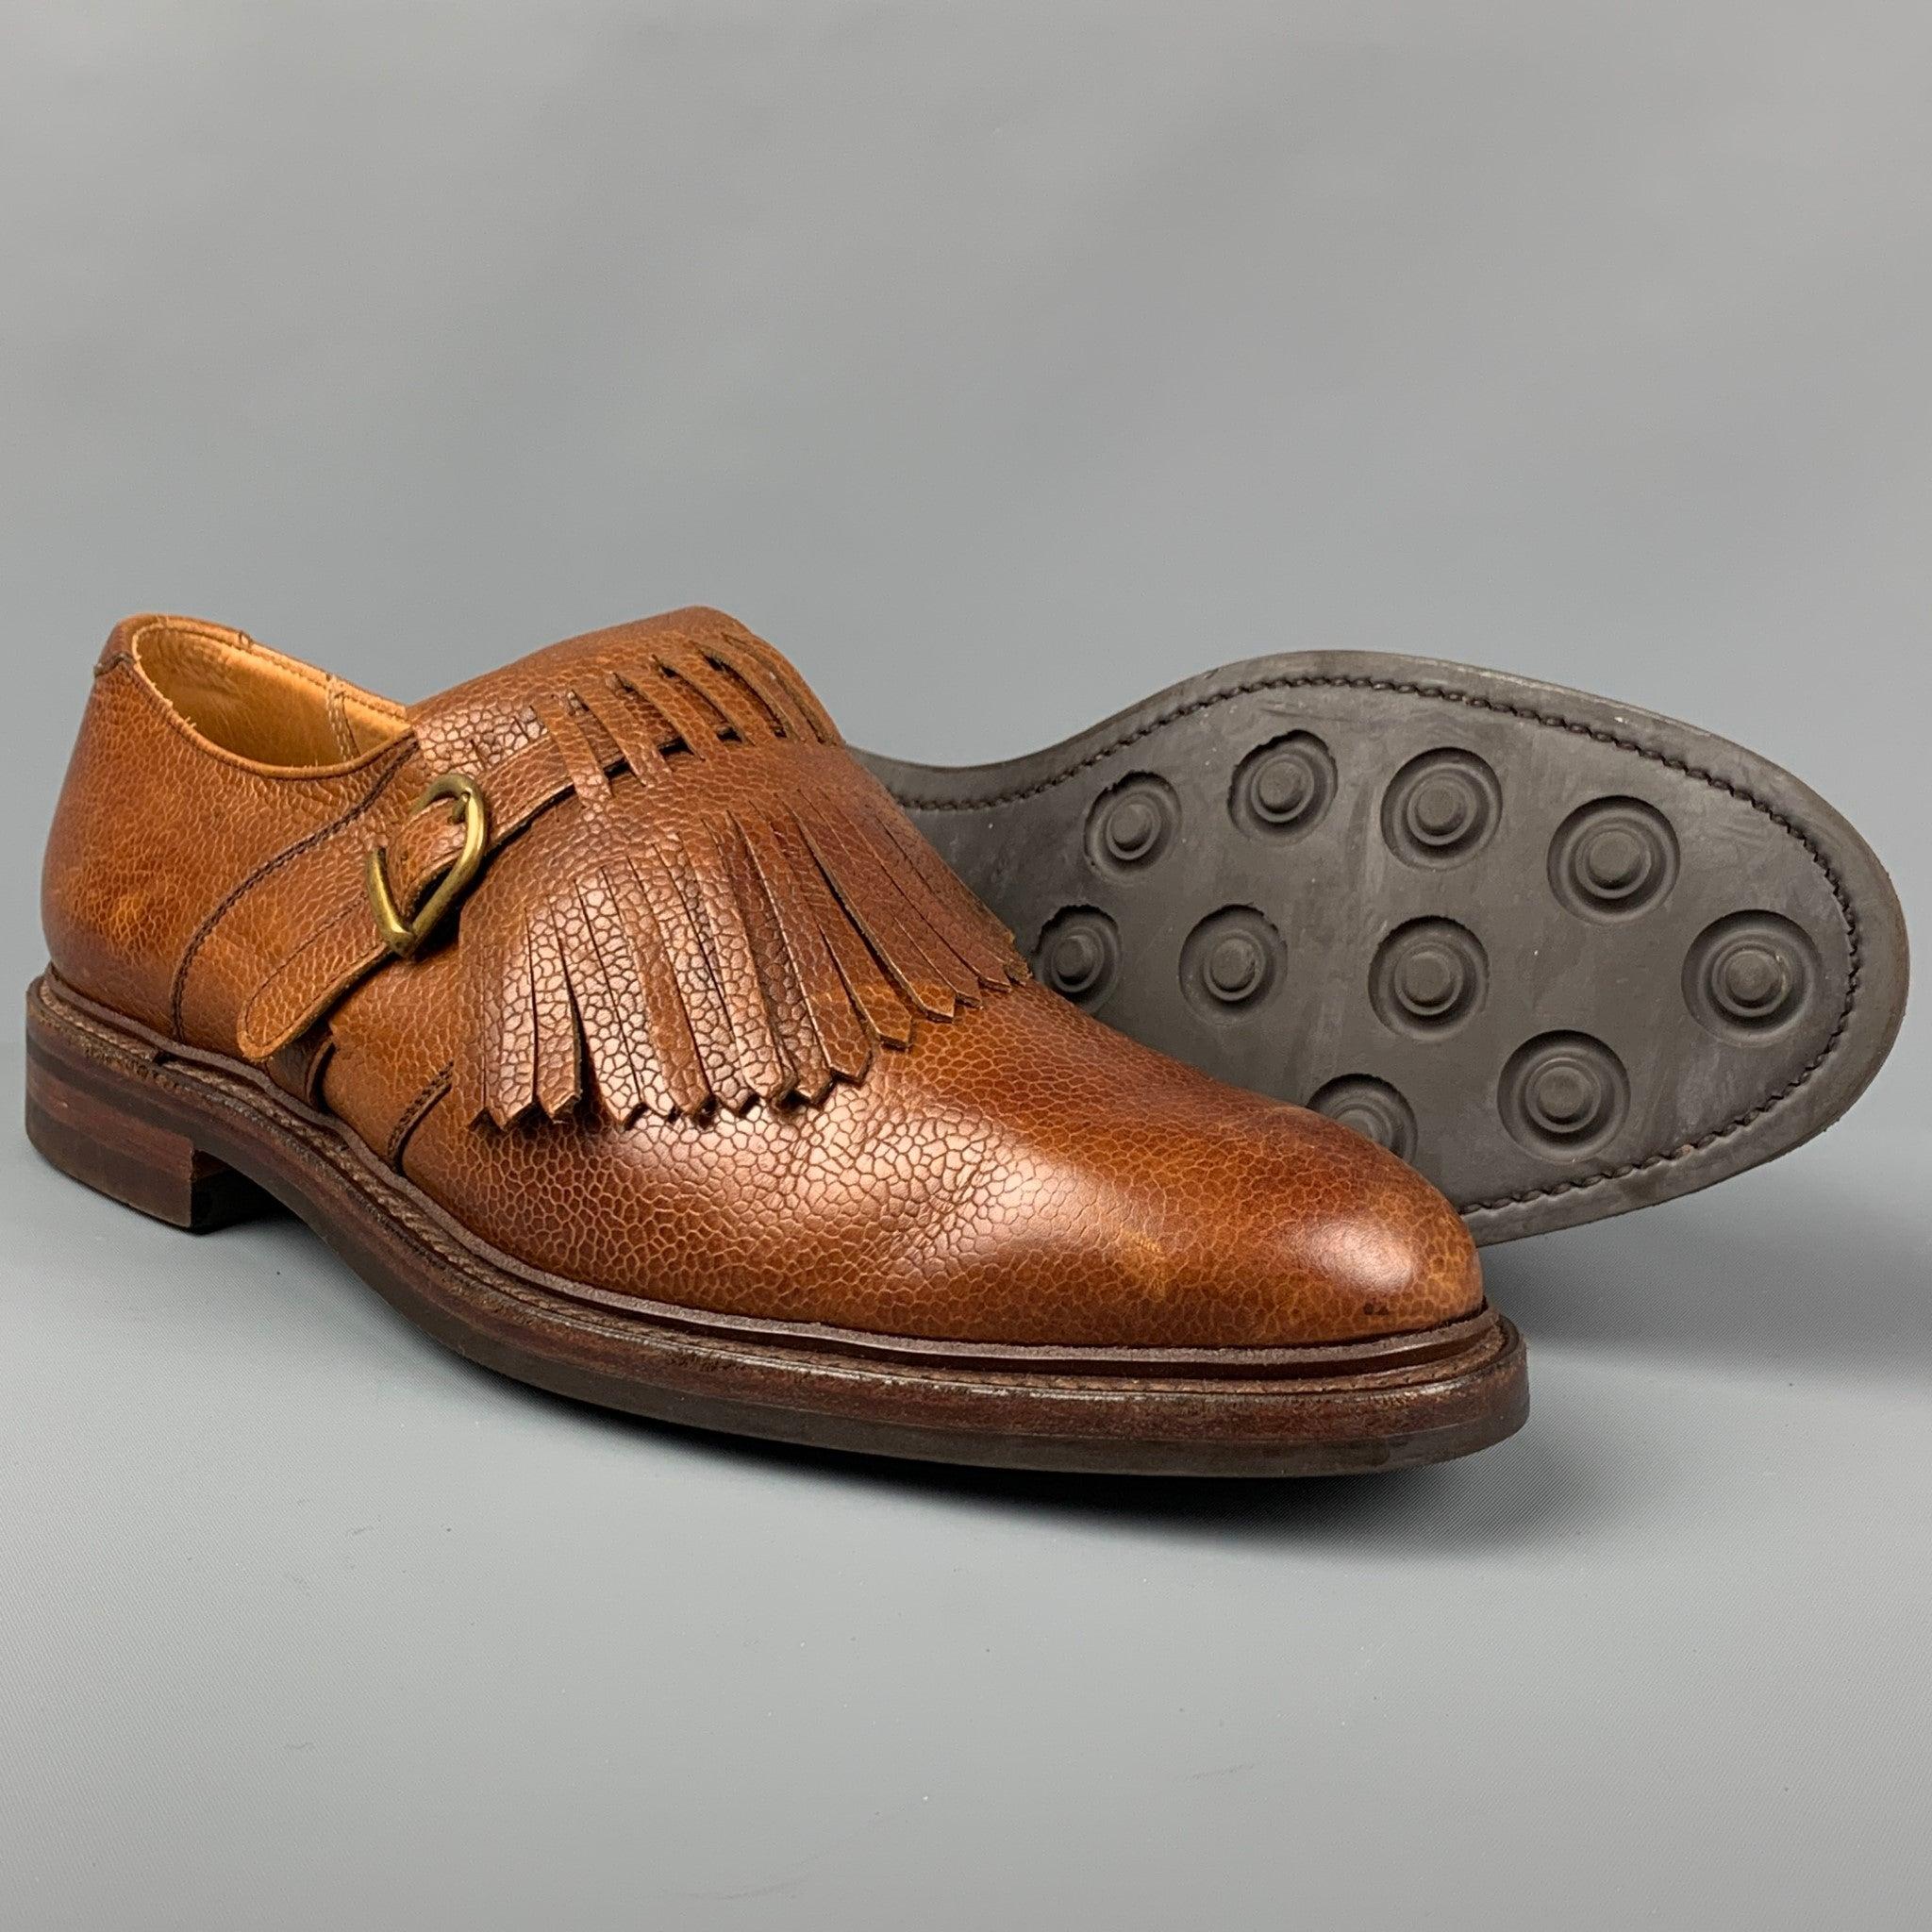 RALPH LAUREN Size 10.5 Tan Fringe Tongue Leather Lace Up Shoes In Good Condition For Sale In San Francisco, CA